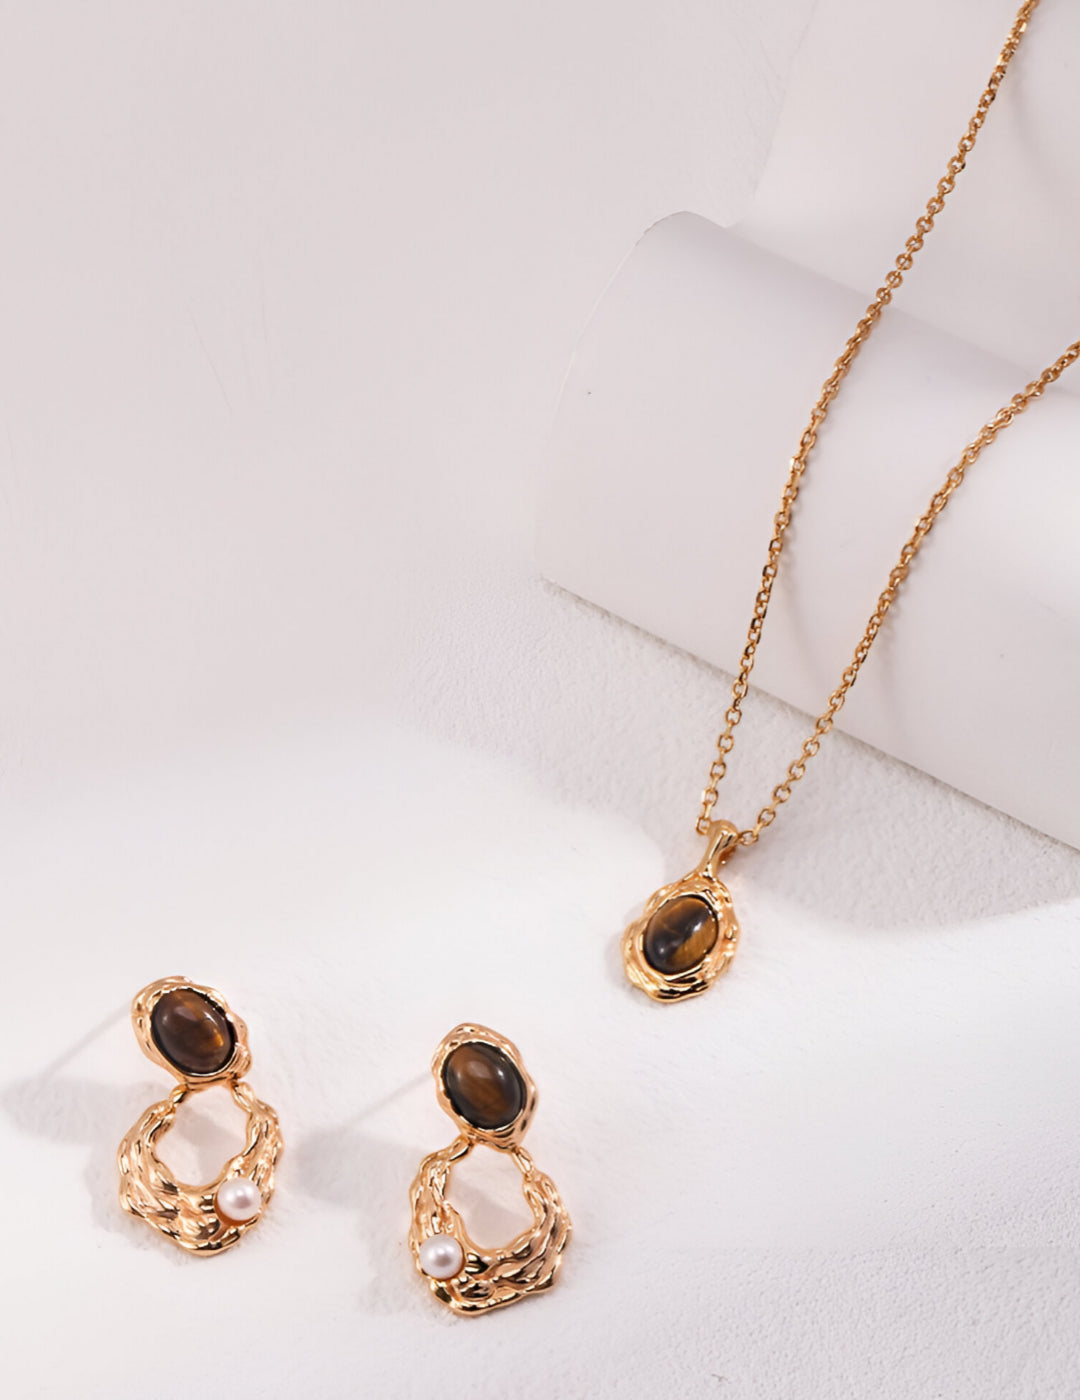 Luxe Necklace  - S925 sterling pure silver - 18K gold Vermeil- adorned with majestic Tiger's Eye gemstones that capture every gaze - Elevate your style with a touch of exotic allure. Embrace beauty and confidence, effortlessly 